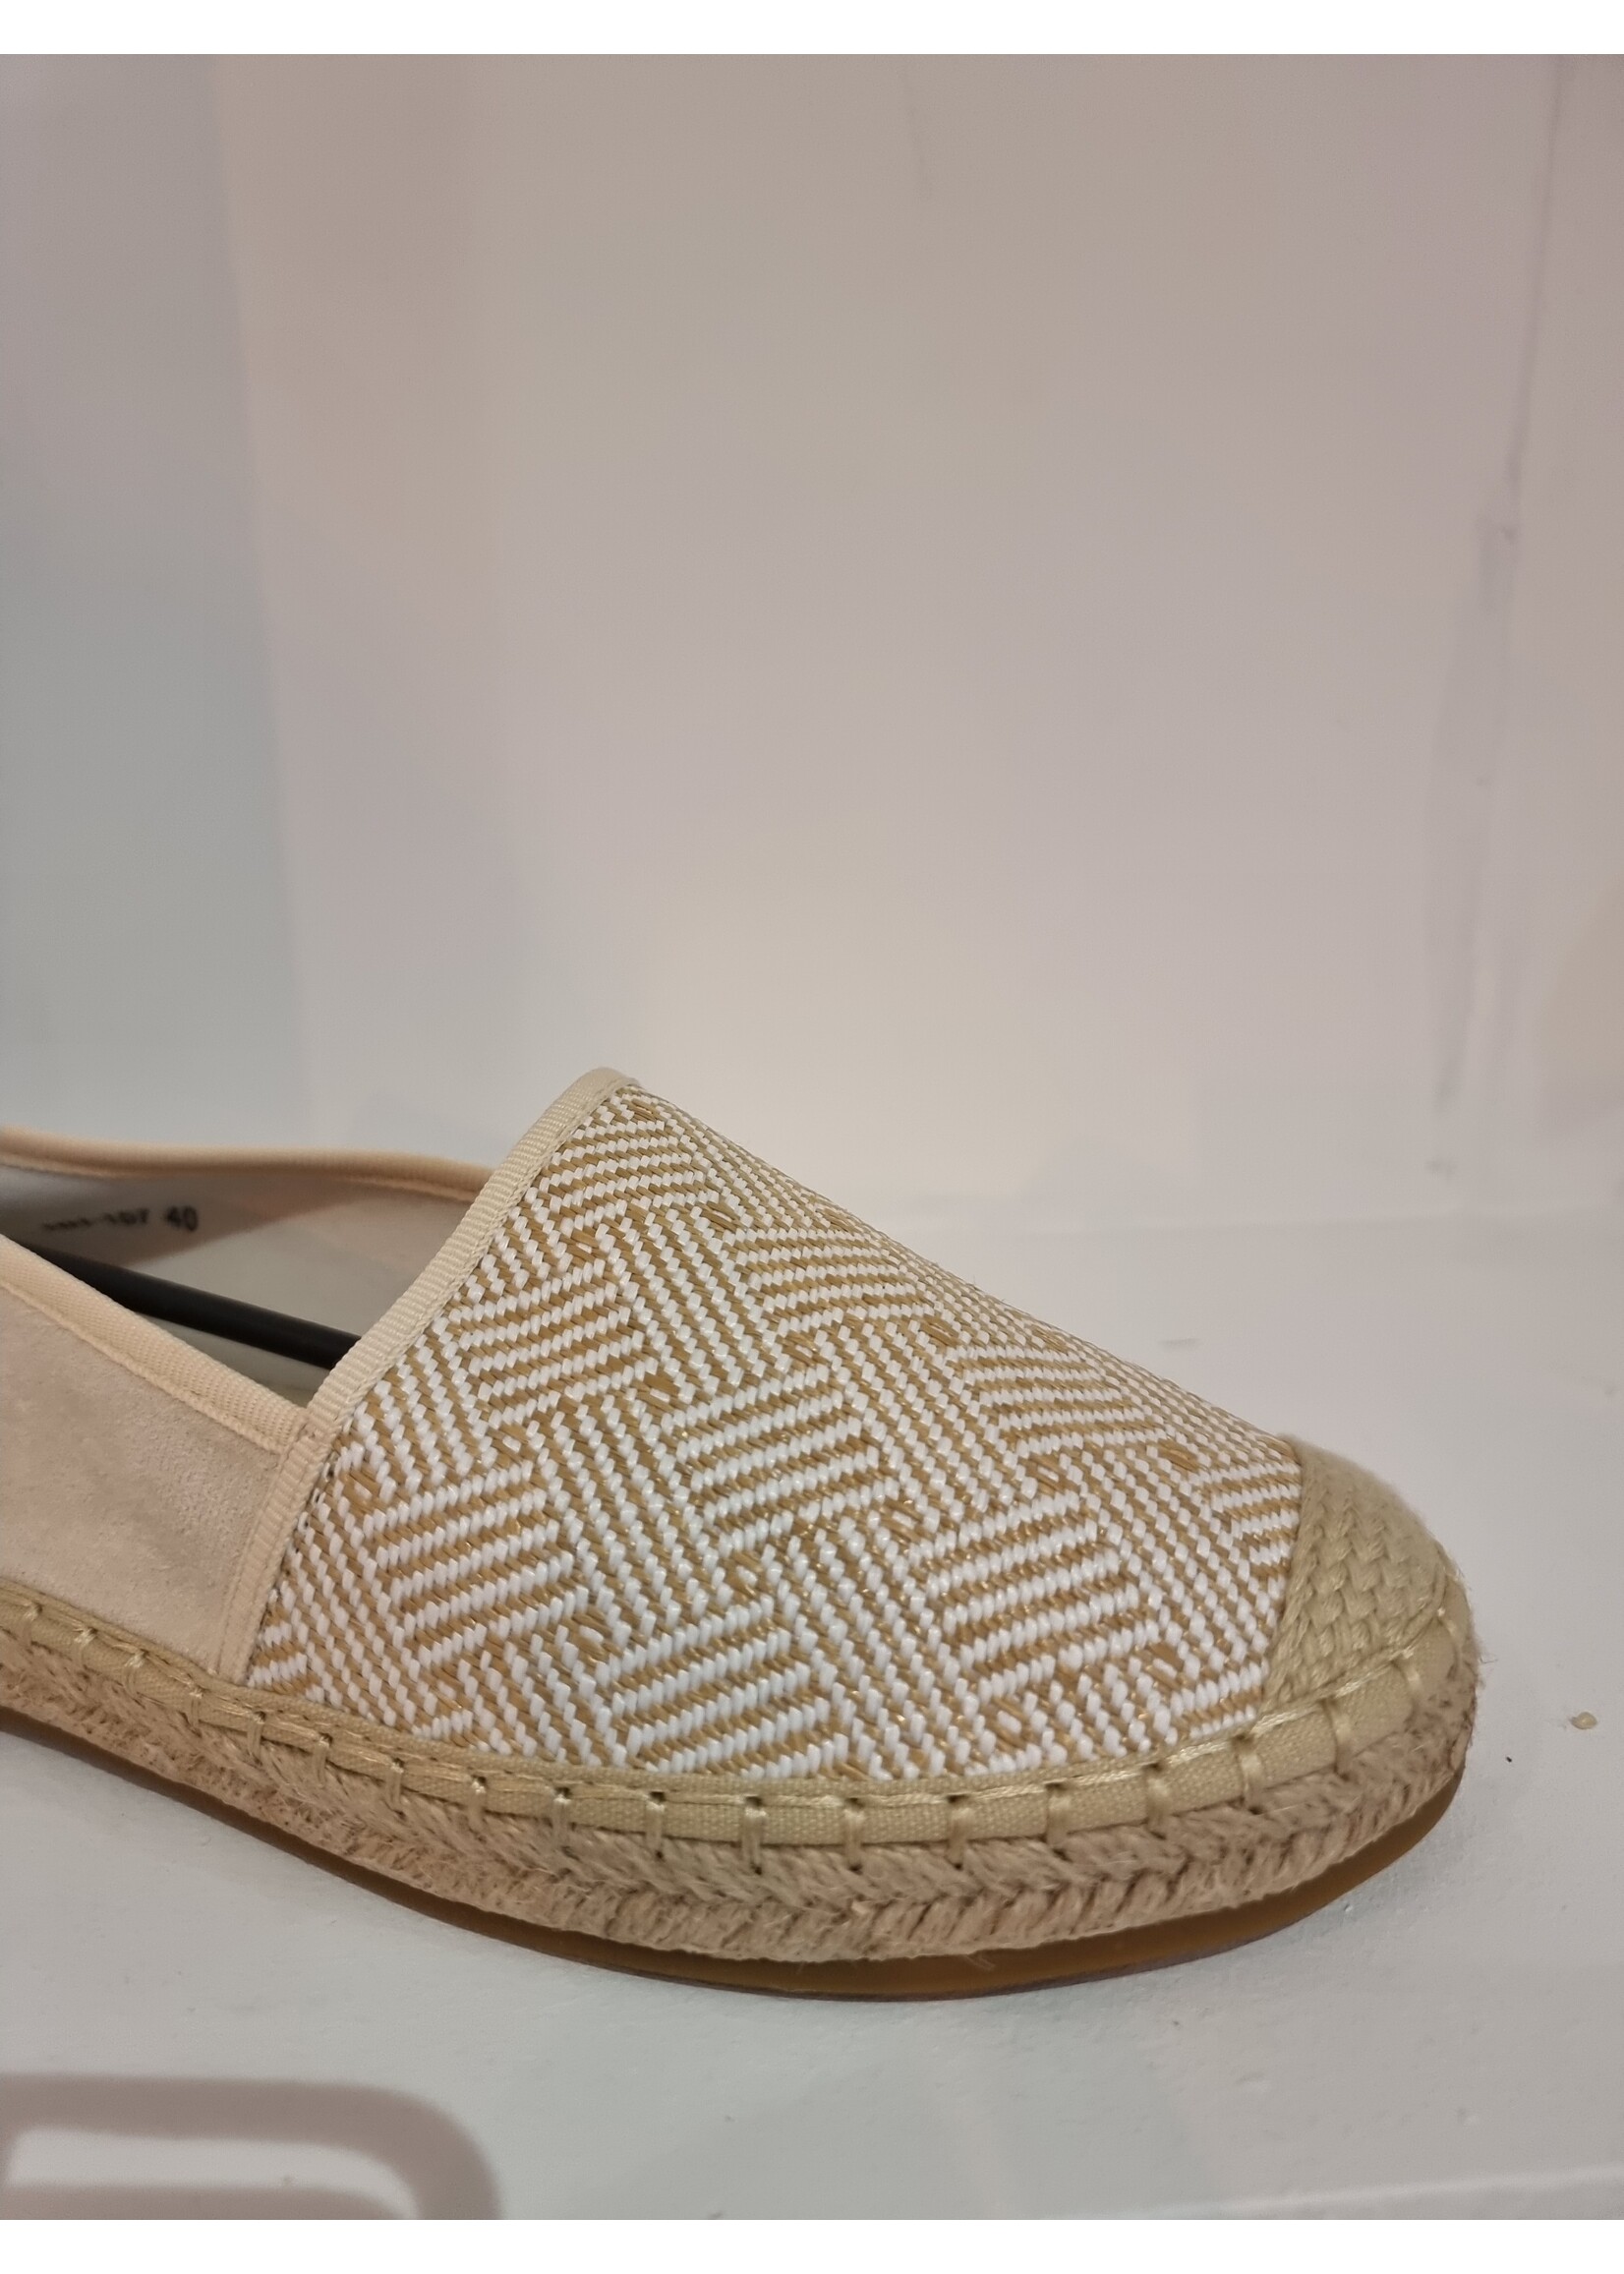 Lucky shoes Espadrille Beige/Offwhite